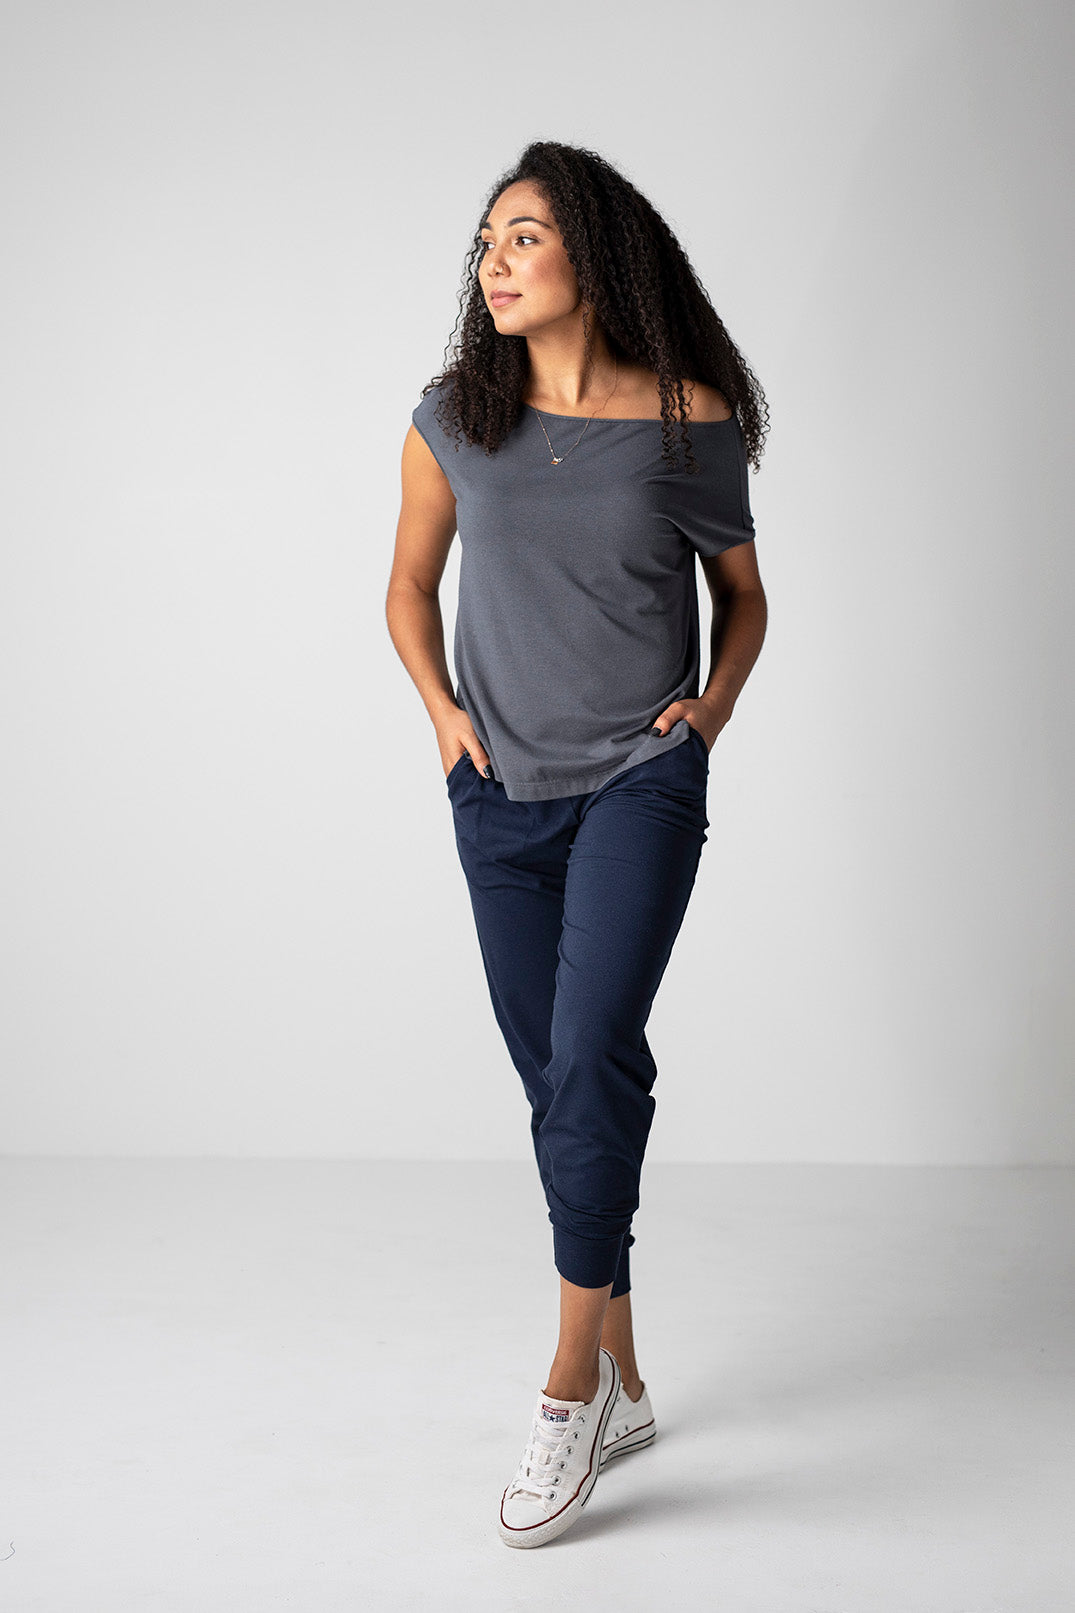 Flirty Off-Shoulder in Slate Gray with 24/7 Pants in Navy